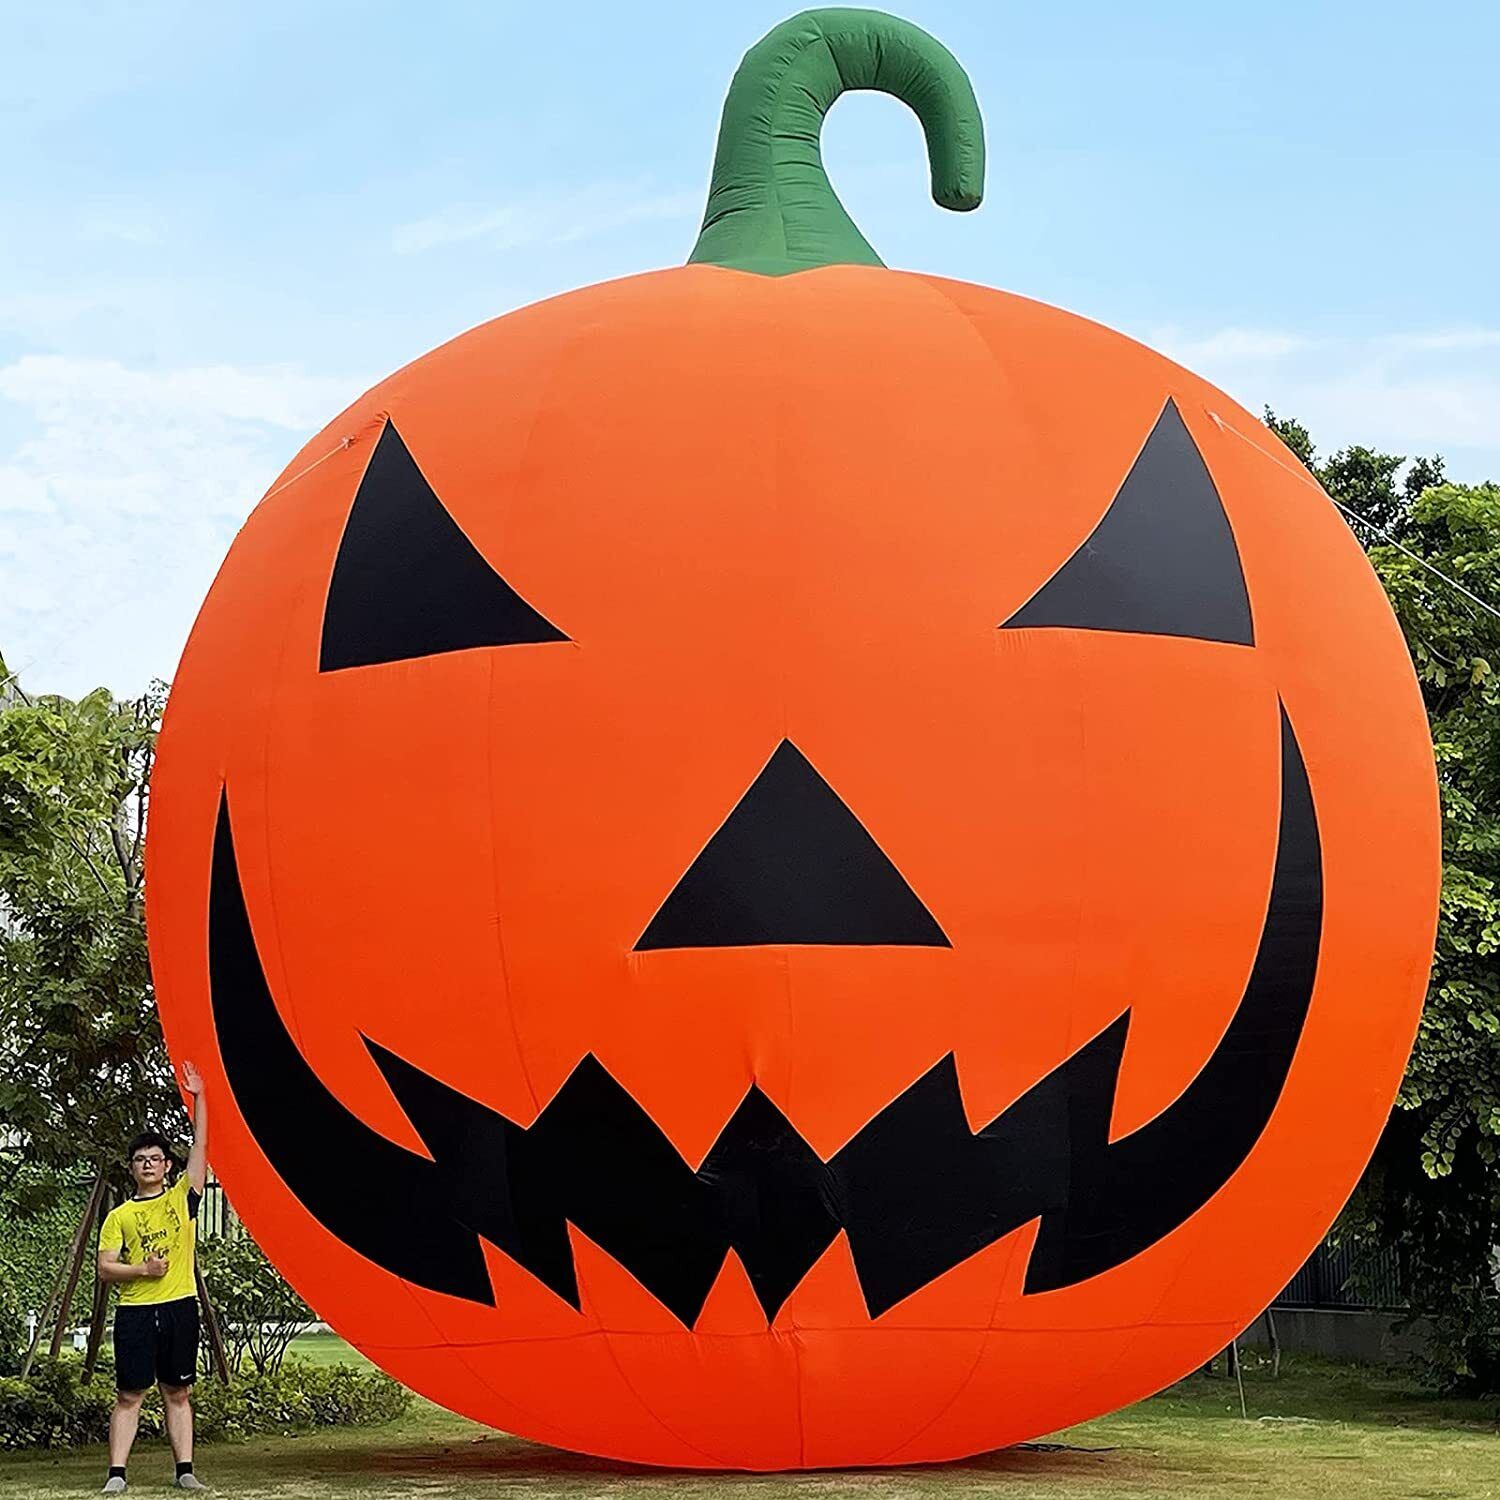 Giant 40Ft Lighted Halloween Inflatable Pumpkin Premium Decorations 950w Blower